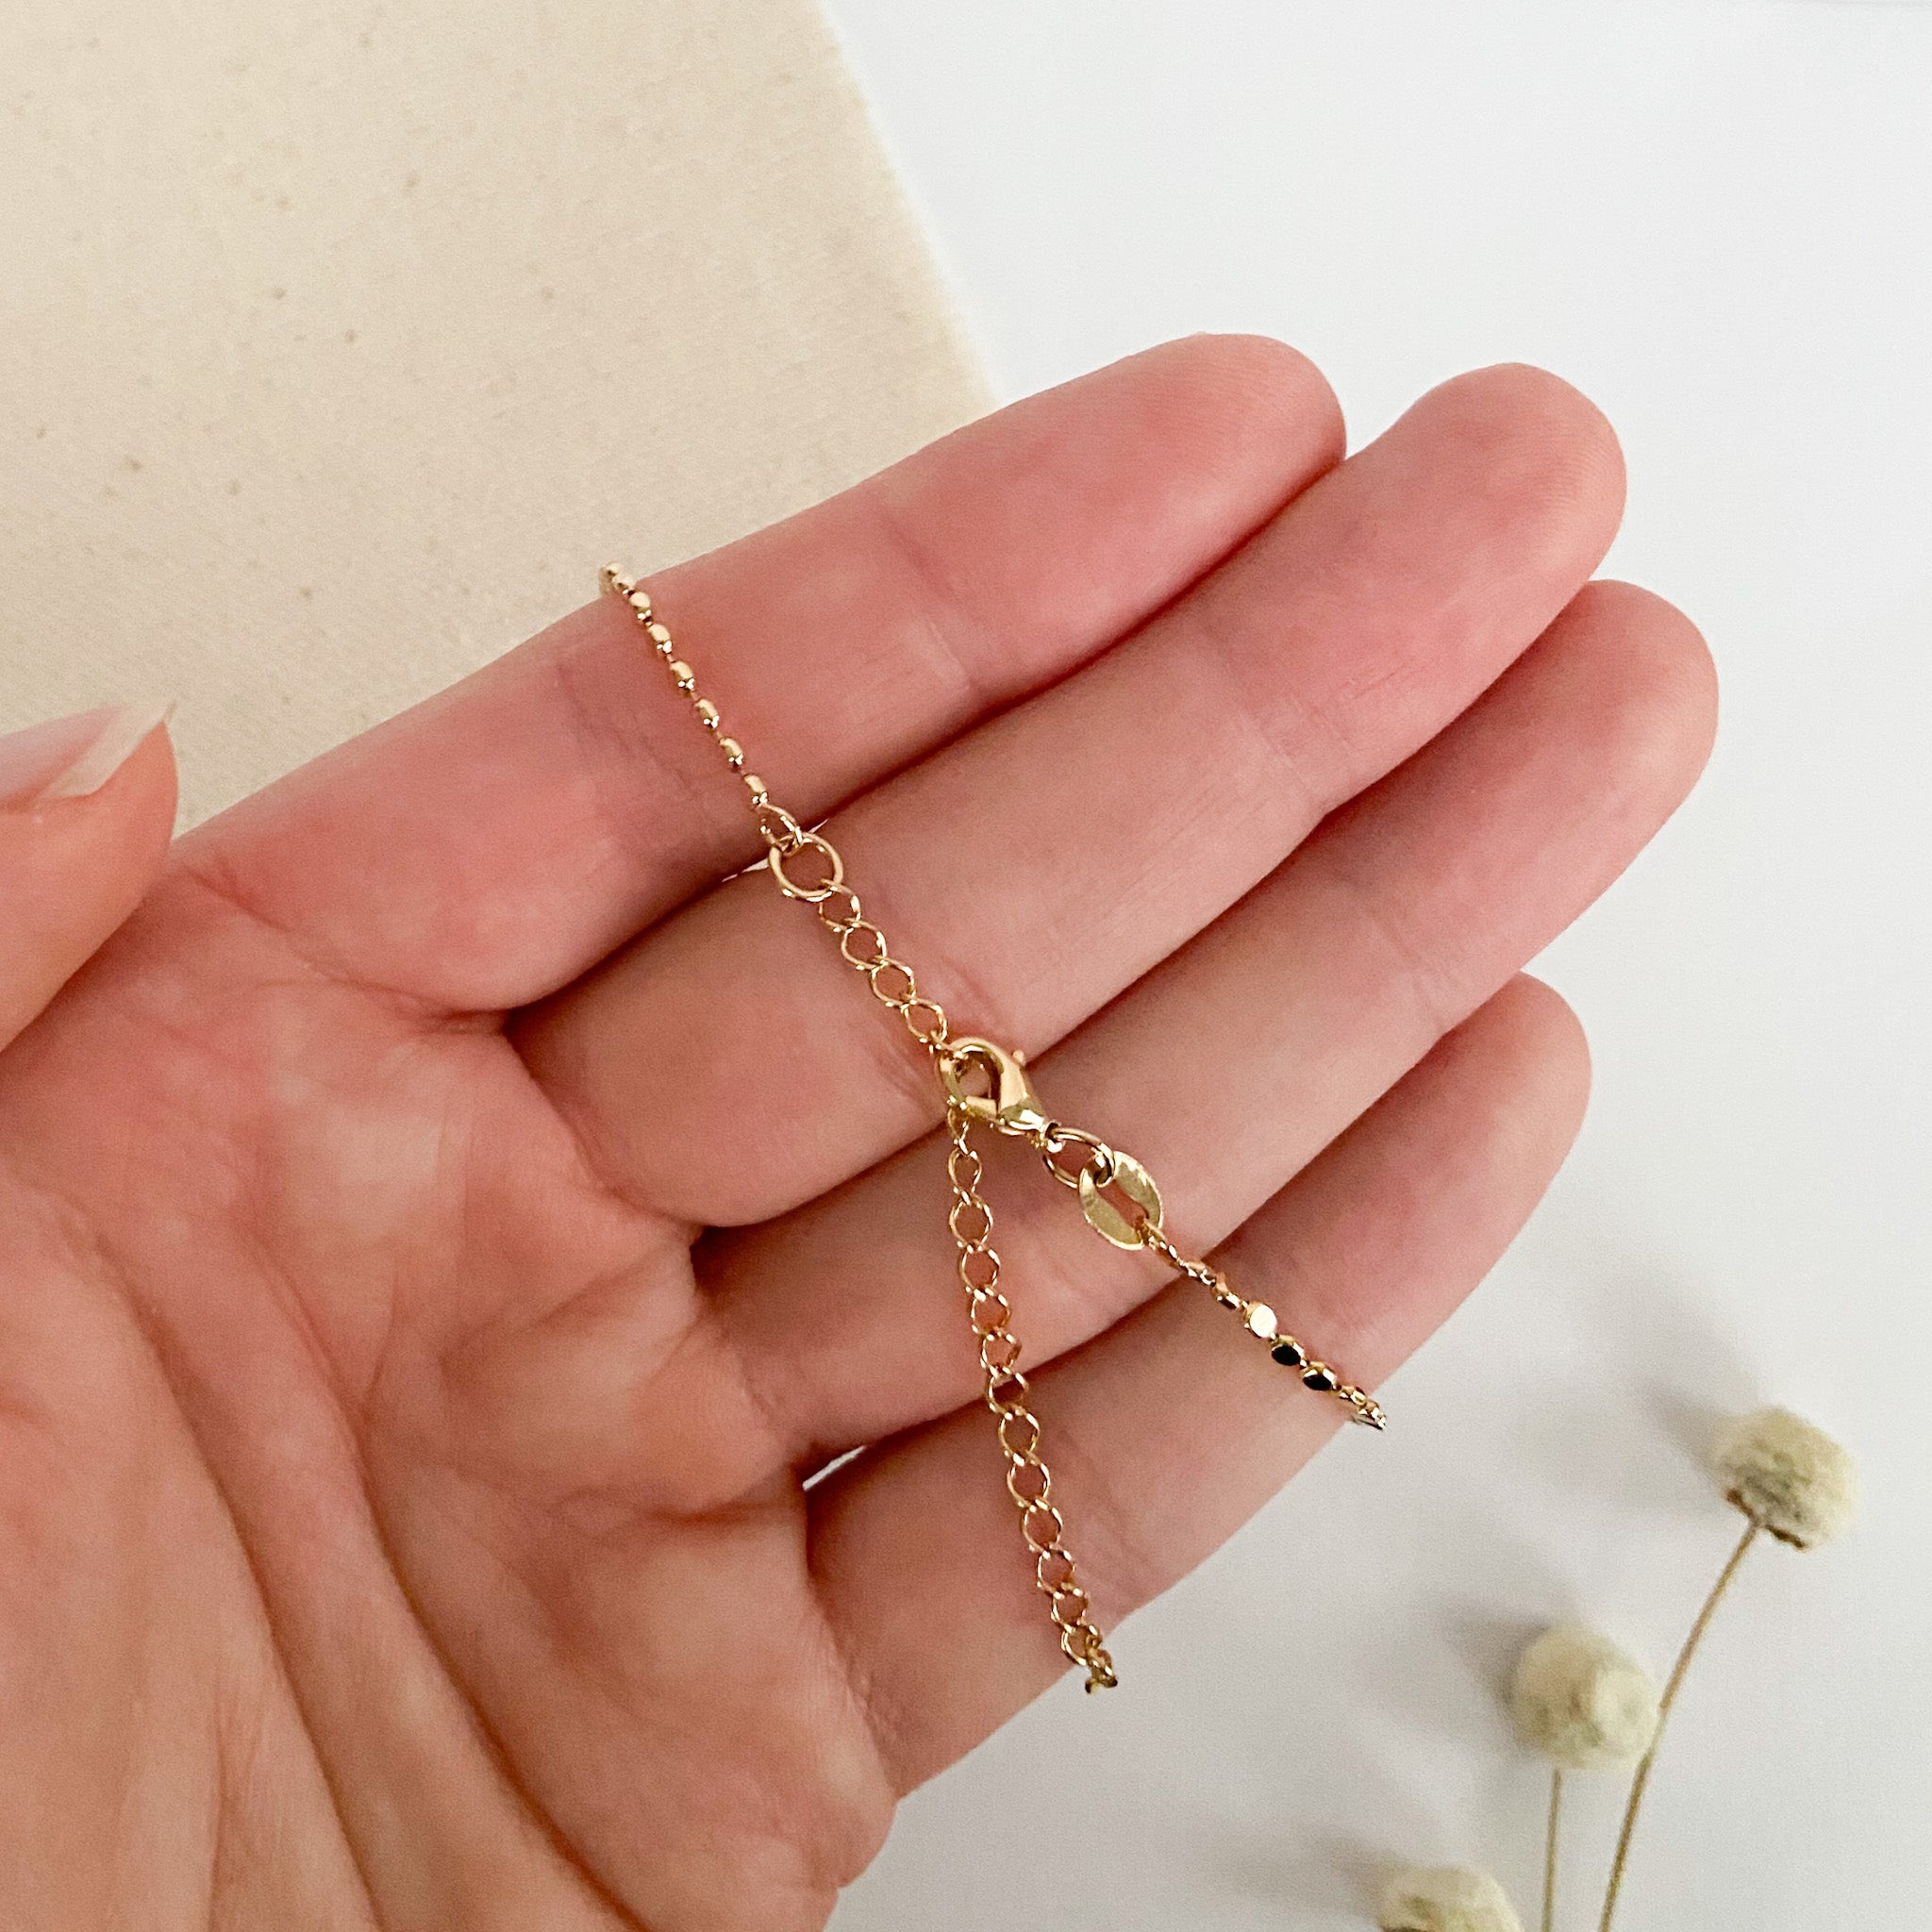 18k Gold Filled Flat Beaded Necklace